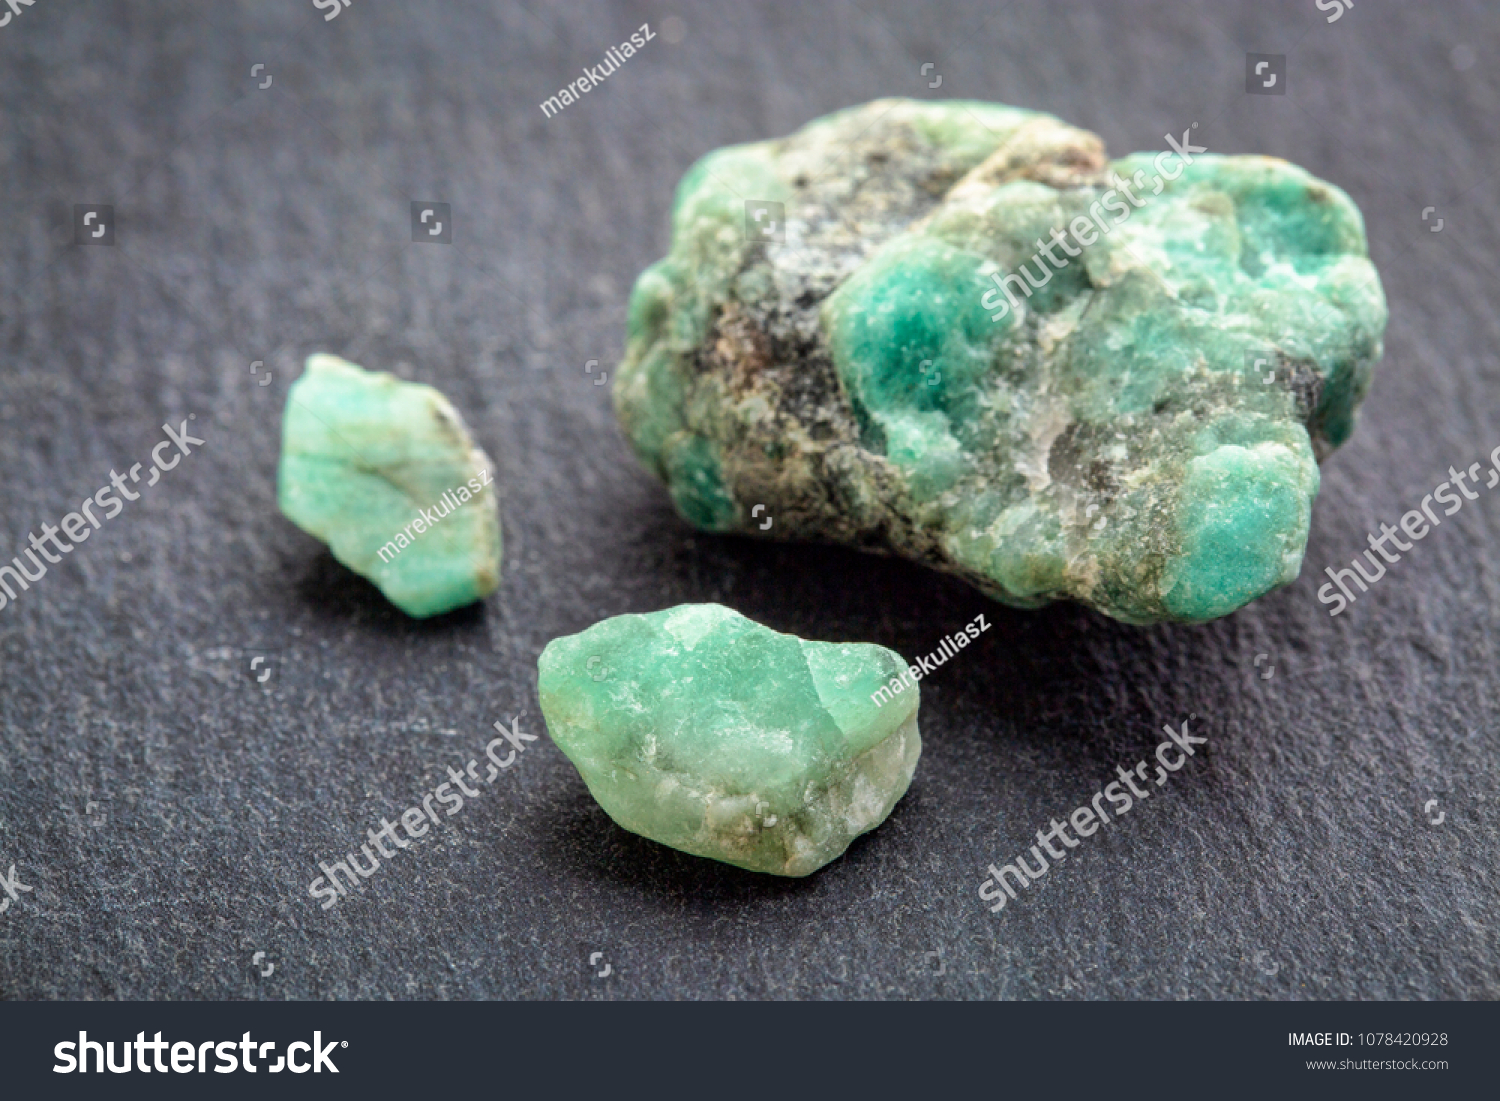 raw emerald gemstones (mineral beryl) with inclusions mined in Brazil on a gray slate stone #1078420928